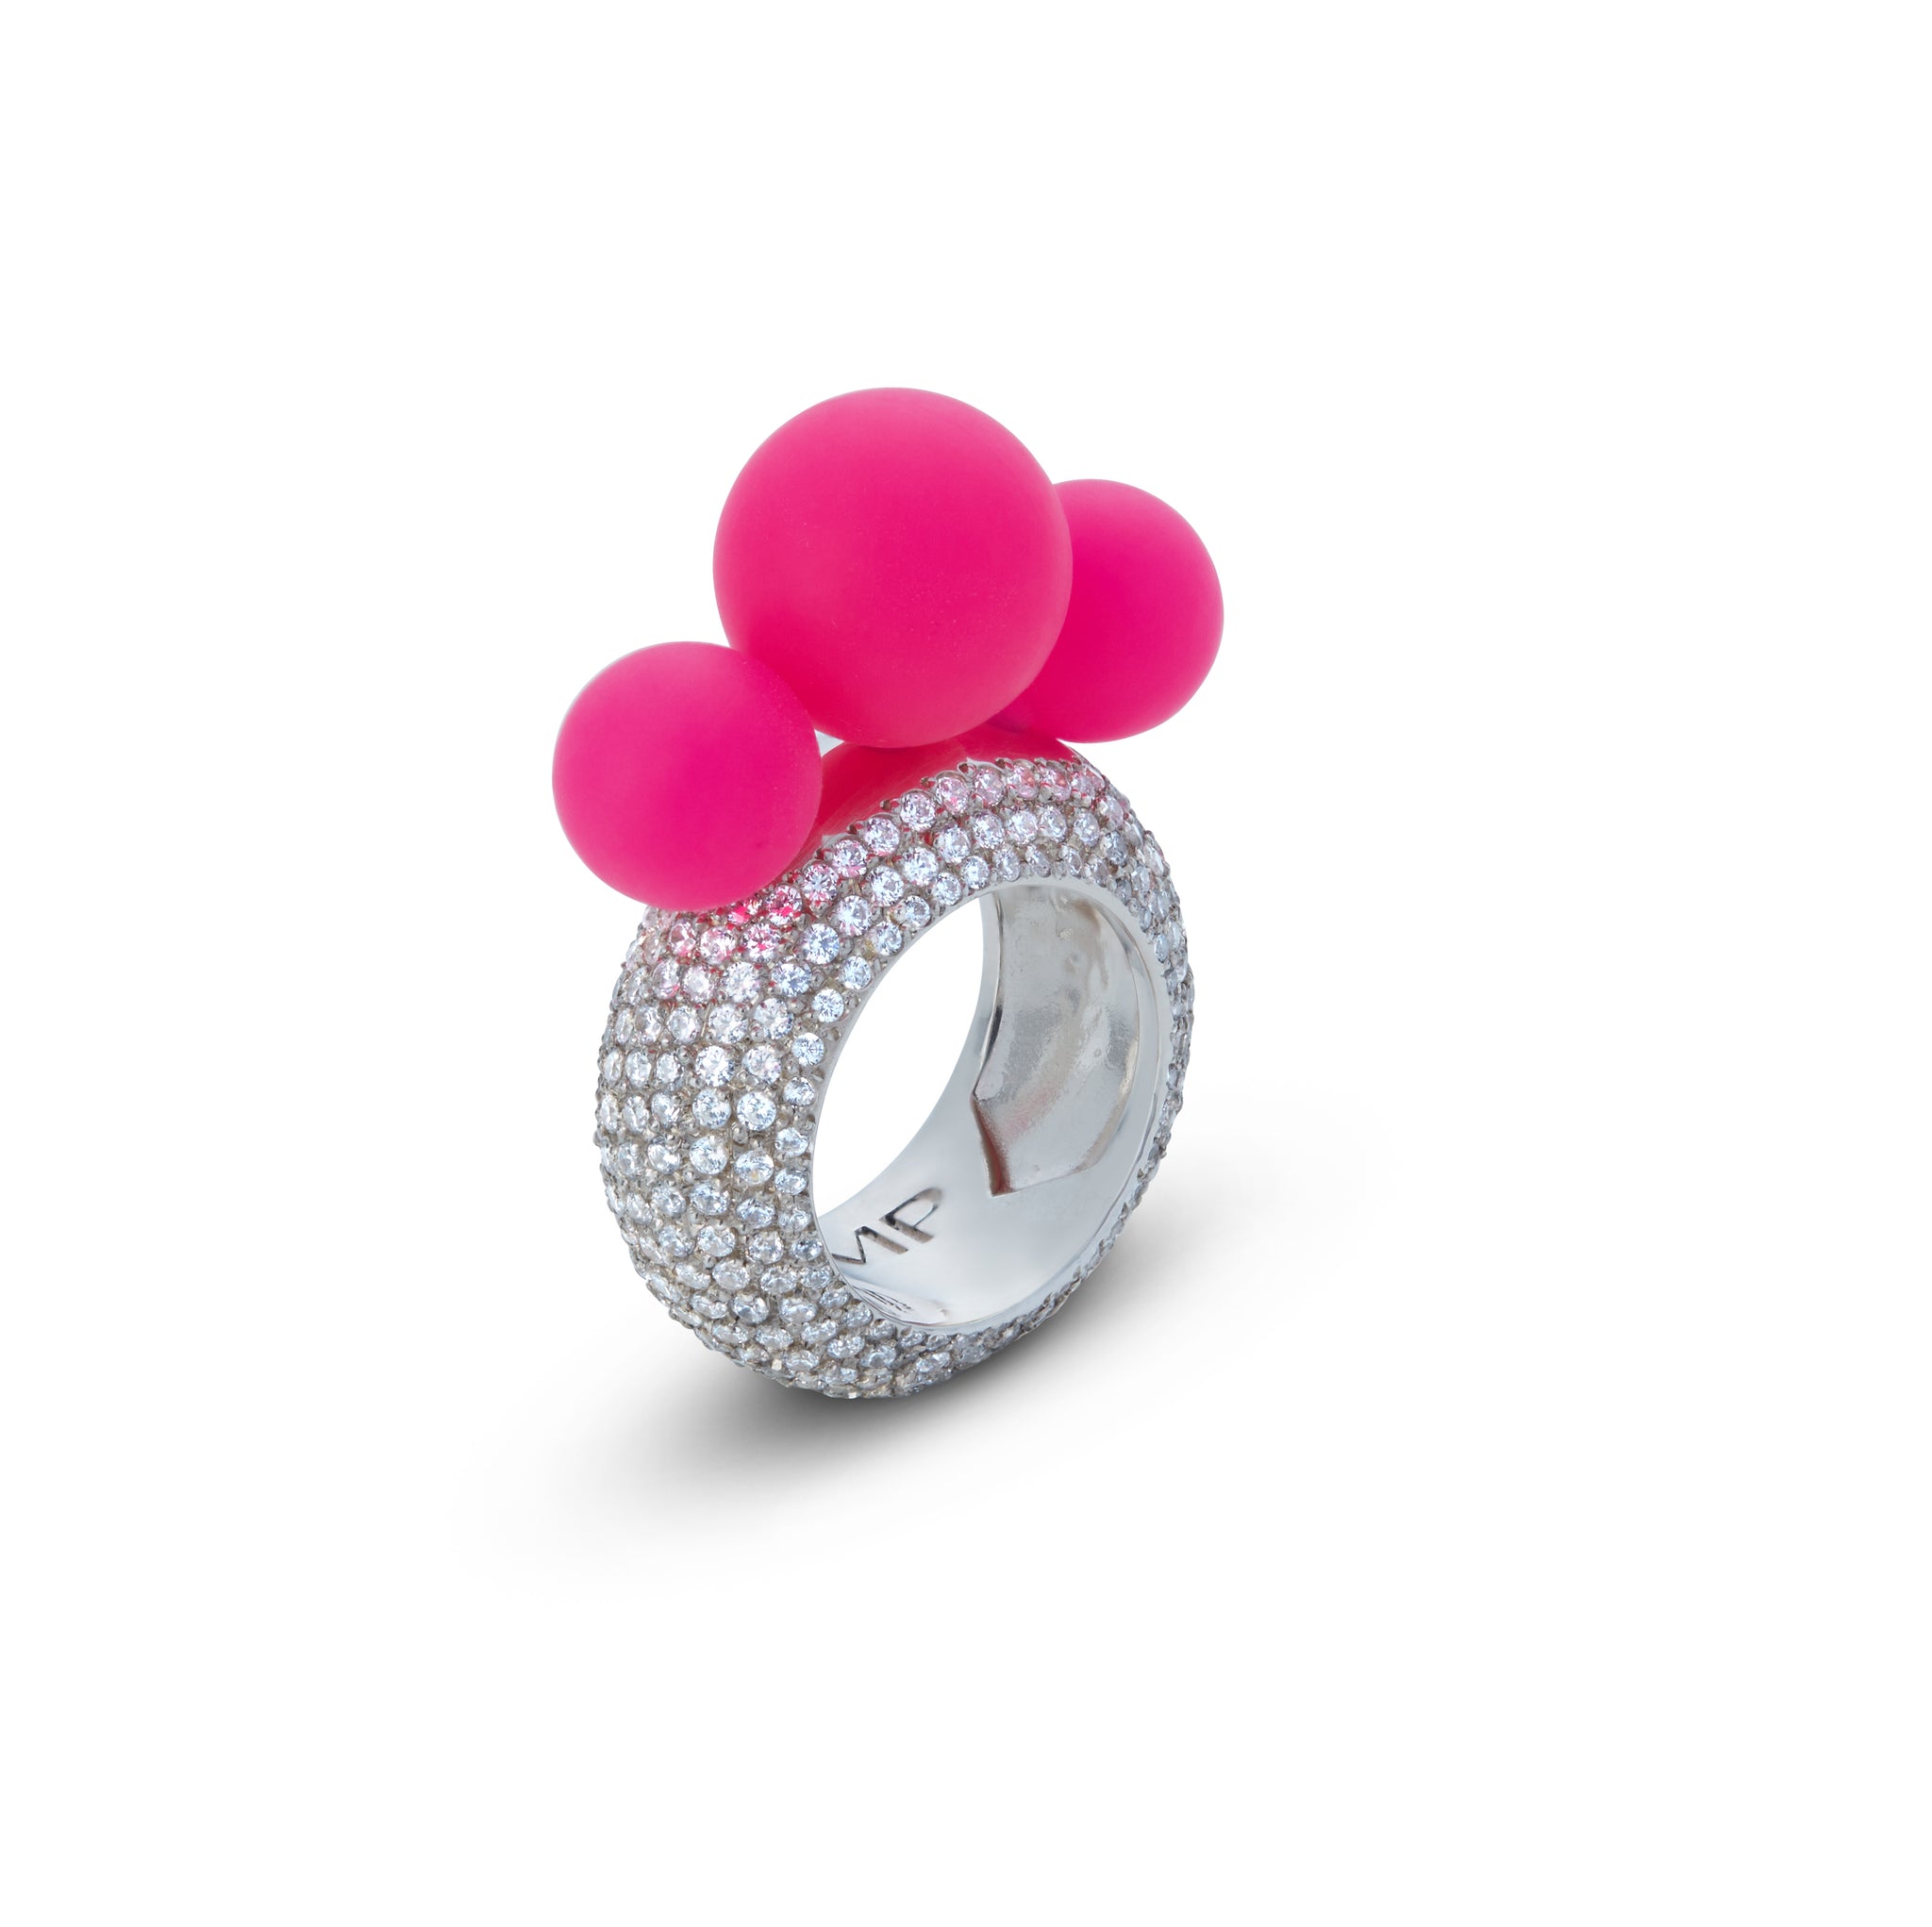 Madame Palm trilogy absolute luxury ring self-love in fuchsia silicone pearls and white gold 18kt band and diamonds